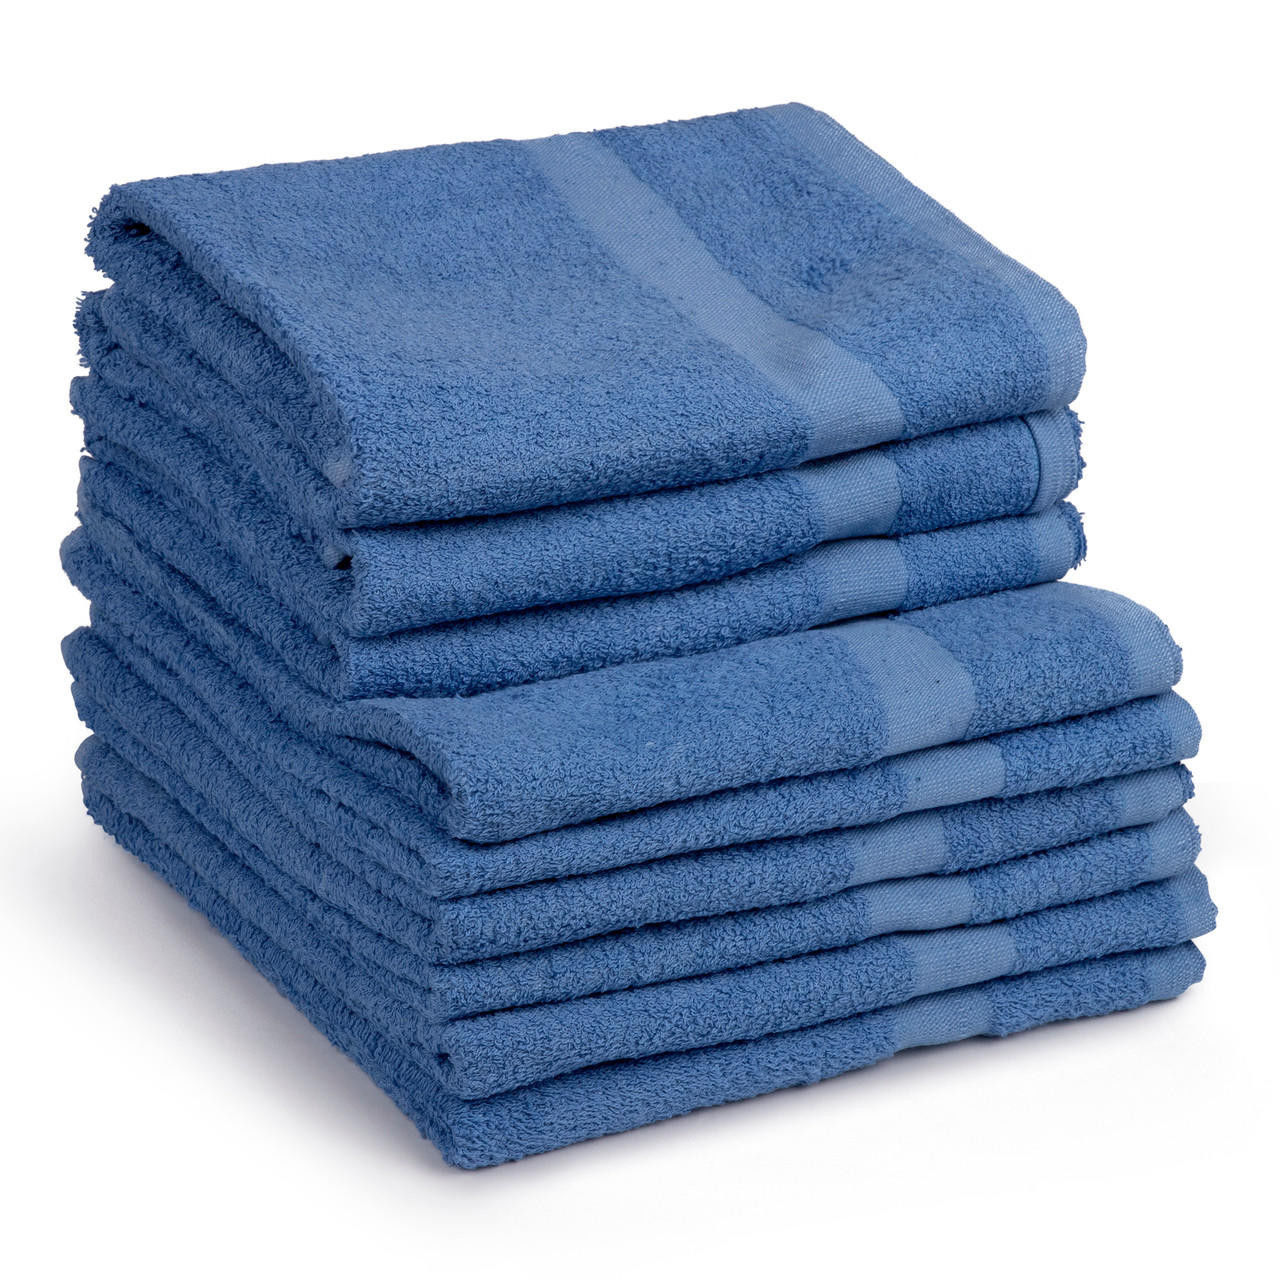 What's the purpose of blue washcloths in bulk from the Blue Towel Collection, 16s?